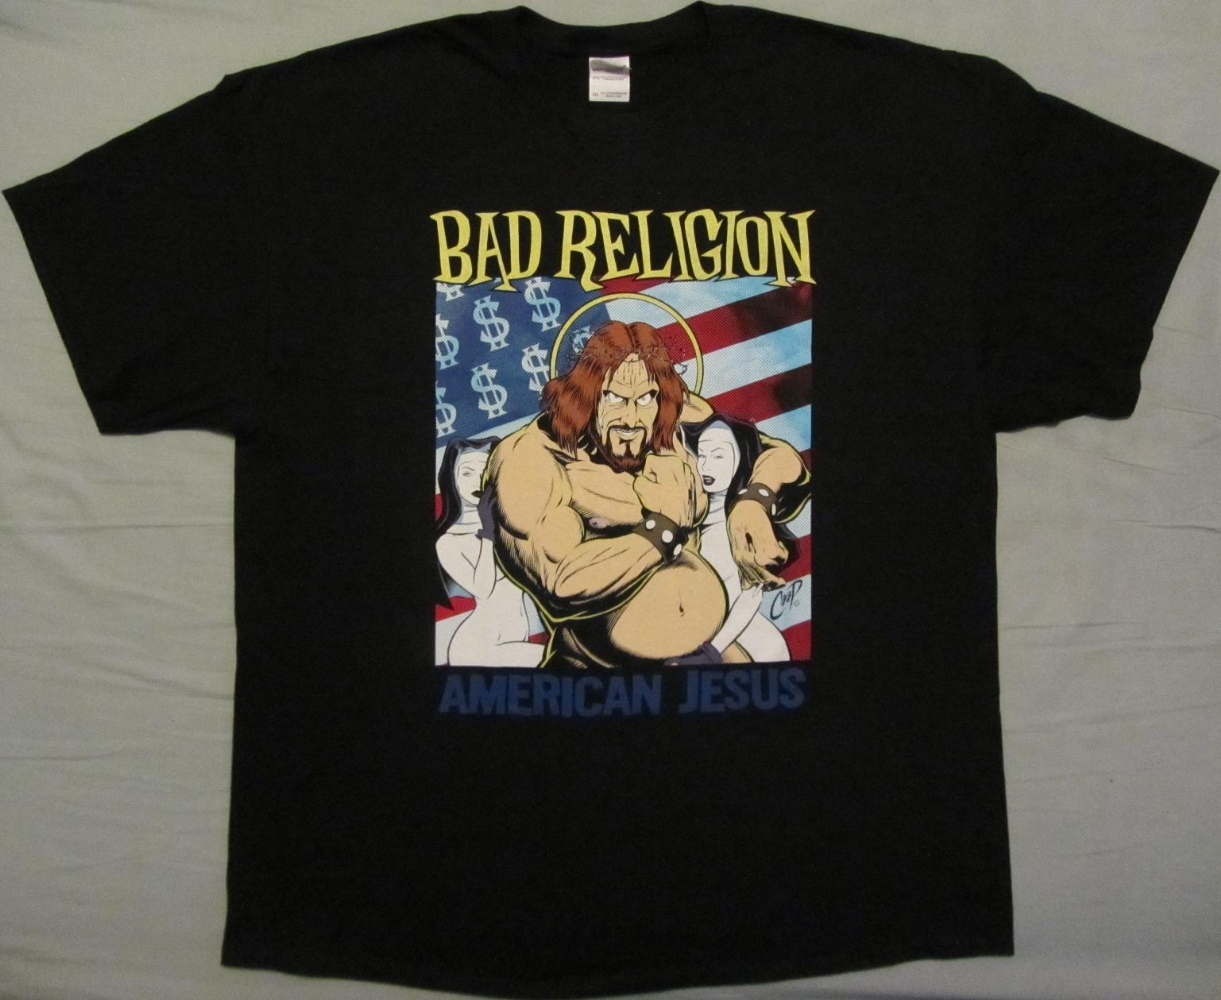 American Jesus | Collectibles | The Bad Religion Page - Since 1995